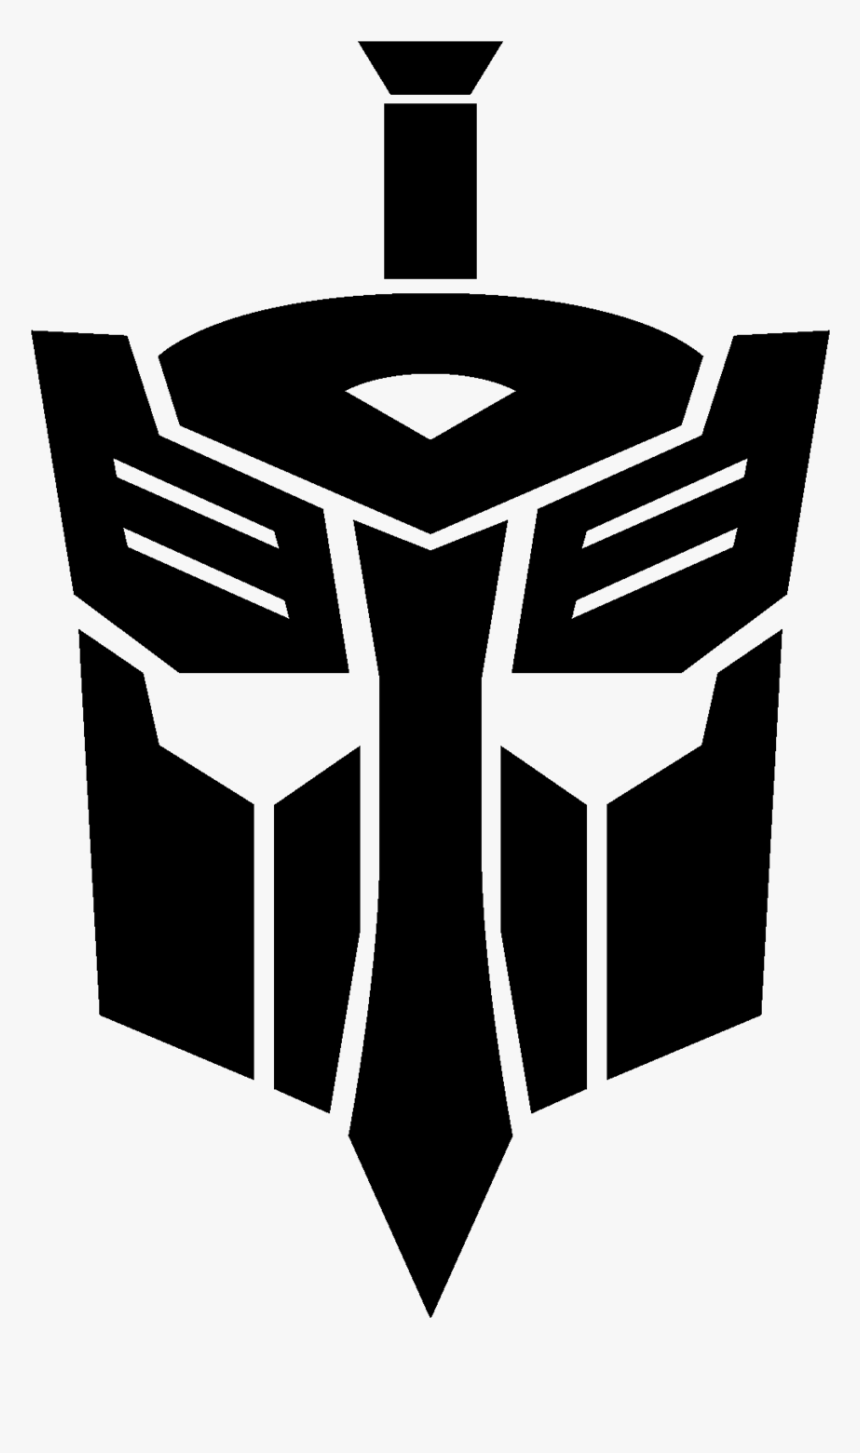 Transformers Generation 2 Cybertronian Symbol By Mr-droy - Transformers Autobots Logo Png, Transparent Png, Free Download